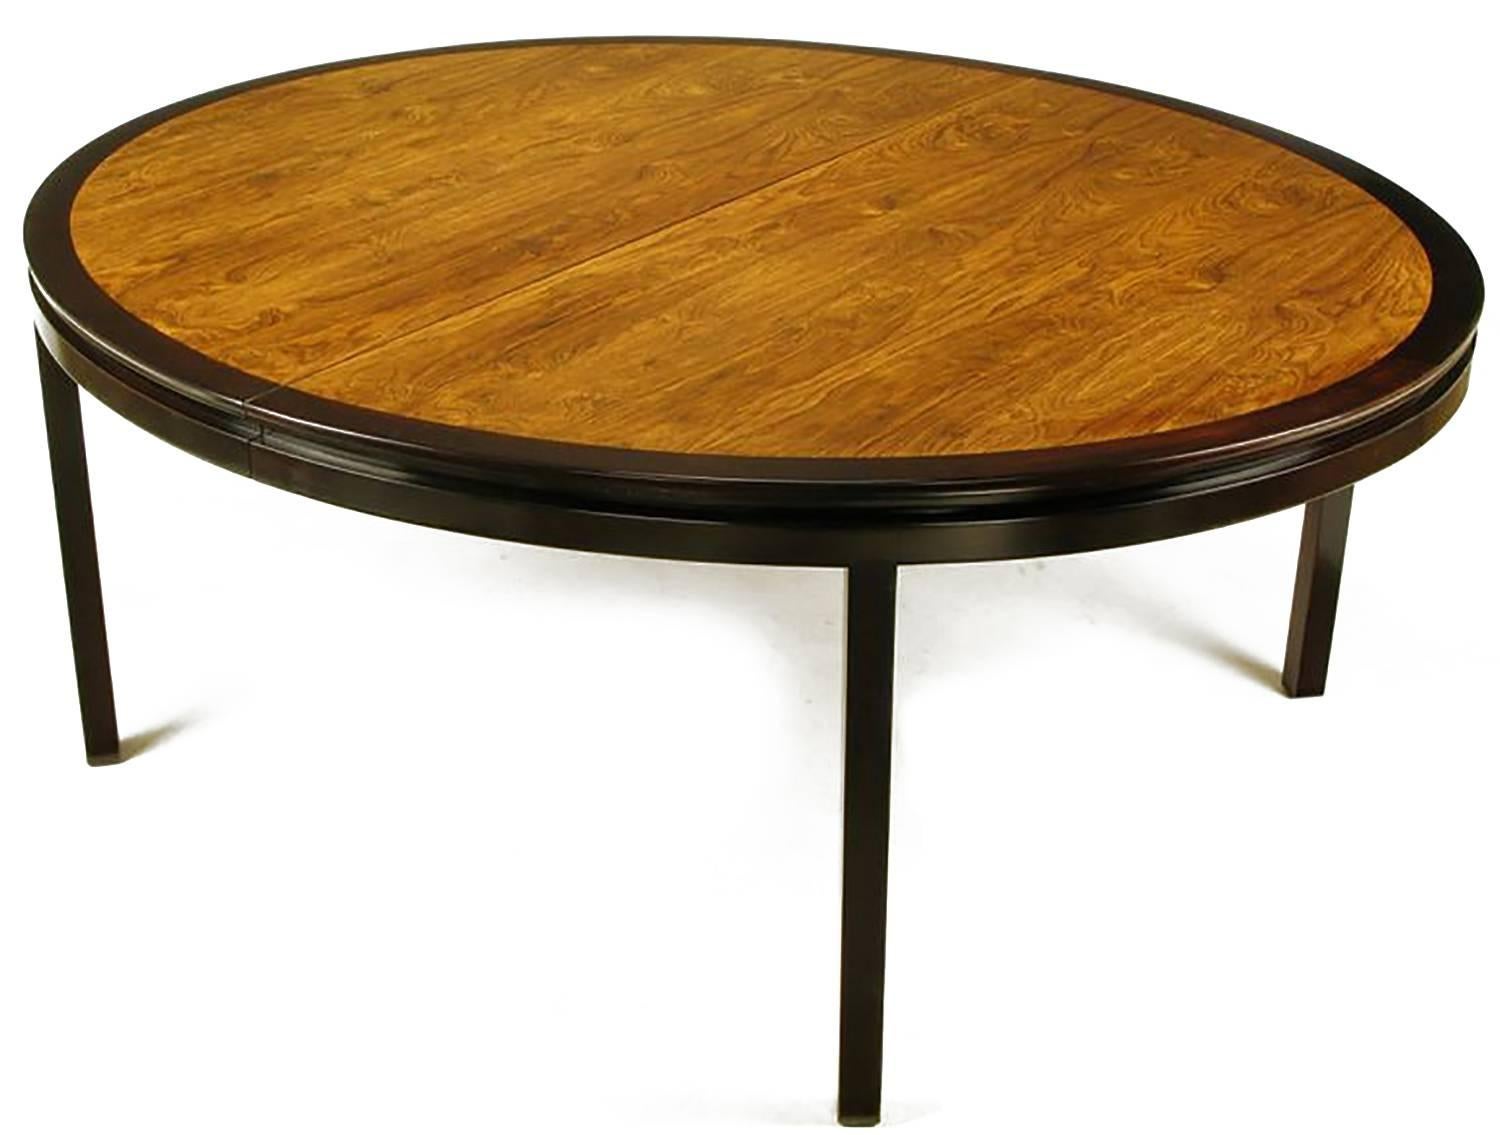 Outstanding custom-made large oval dining table designed by Edward Wormley for Dunbar. Dark stained mahogany border, incised apron and squared legs. Inlaid bookmatched rosewood veneer top is beautifully grained. Restored to like new condition.